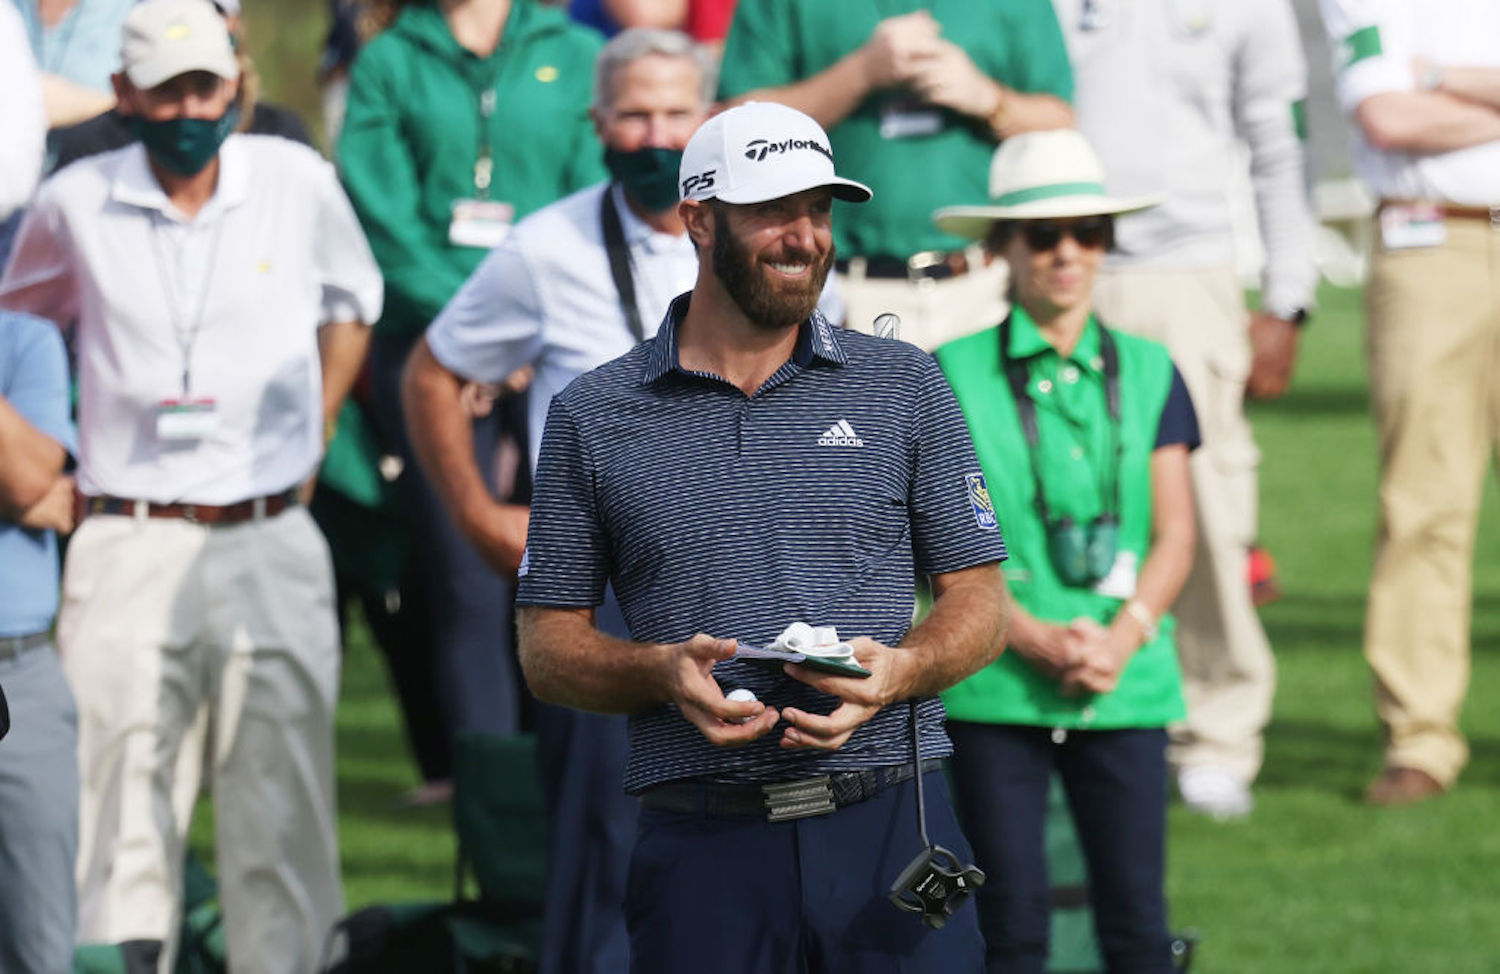 Dustin Johnson won the 2020 Masters Tournament for his first green jacket, and he accomplished something never done before in the process.